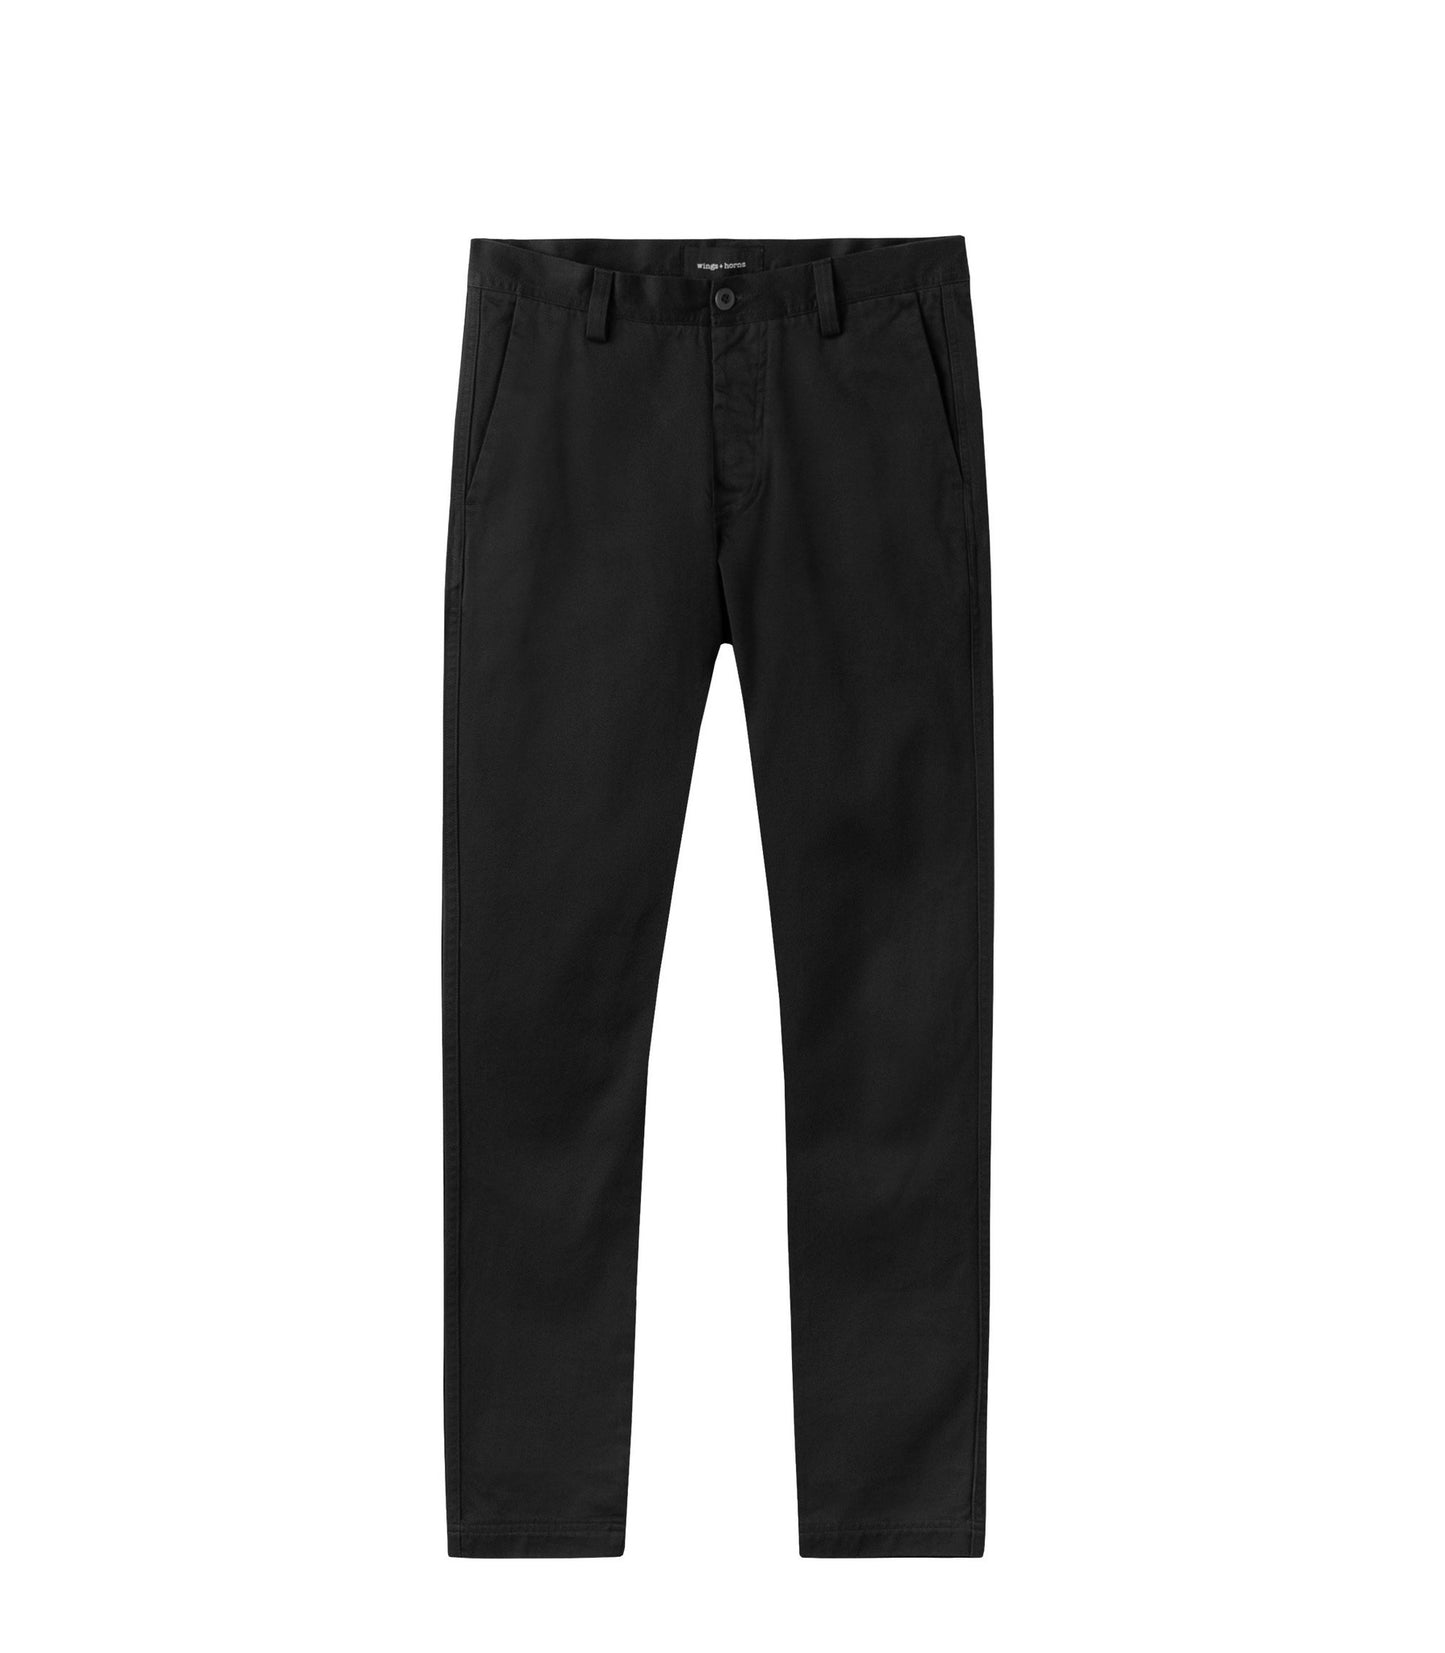 Woven Weapon Twill Tokyo Pant